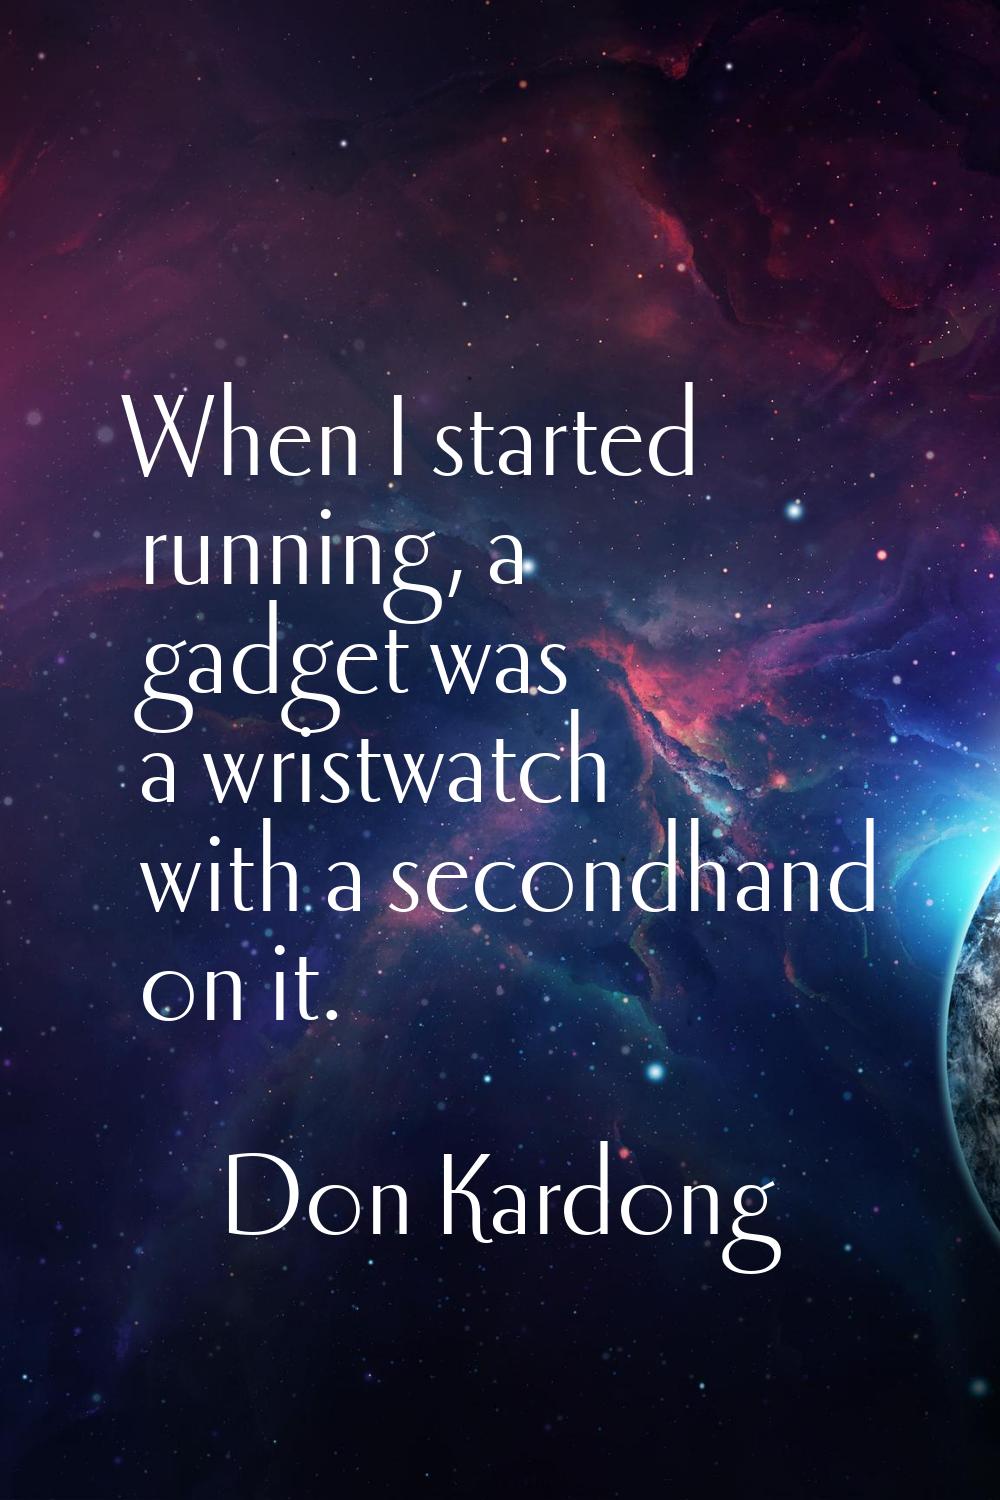 When I started running, a gadget was a wristwatch with a secondhand on it.